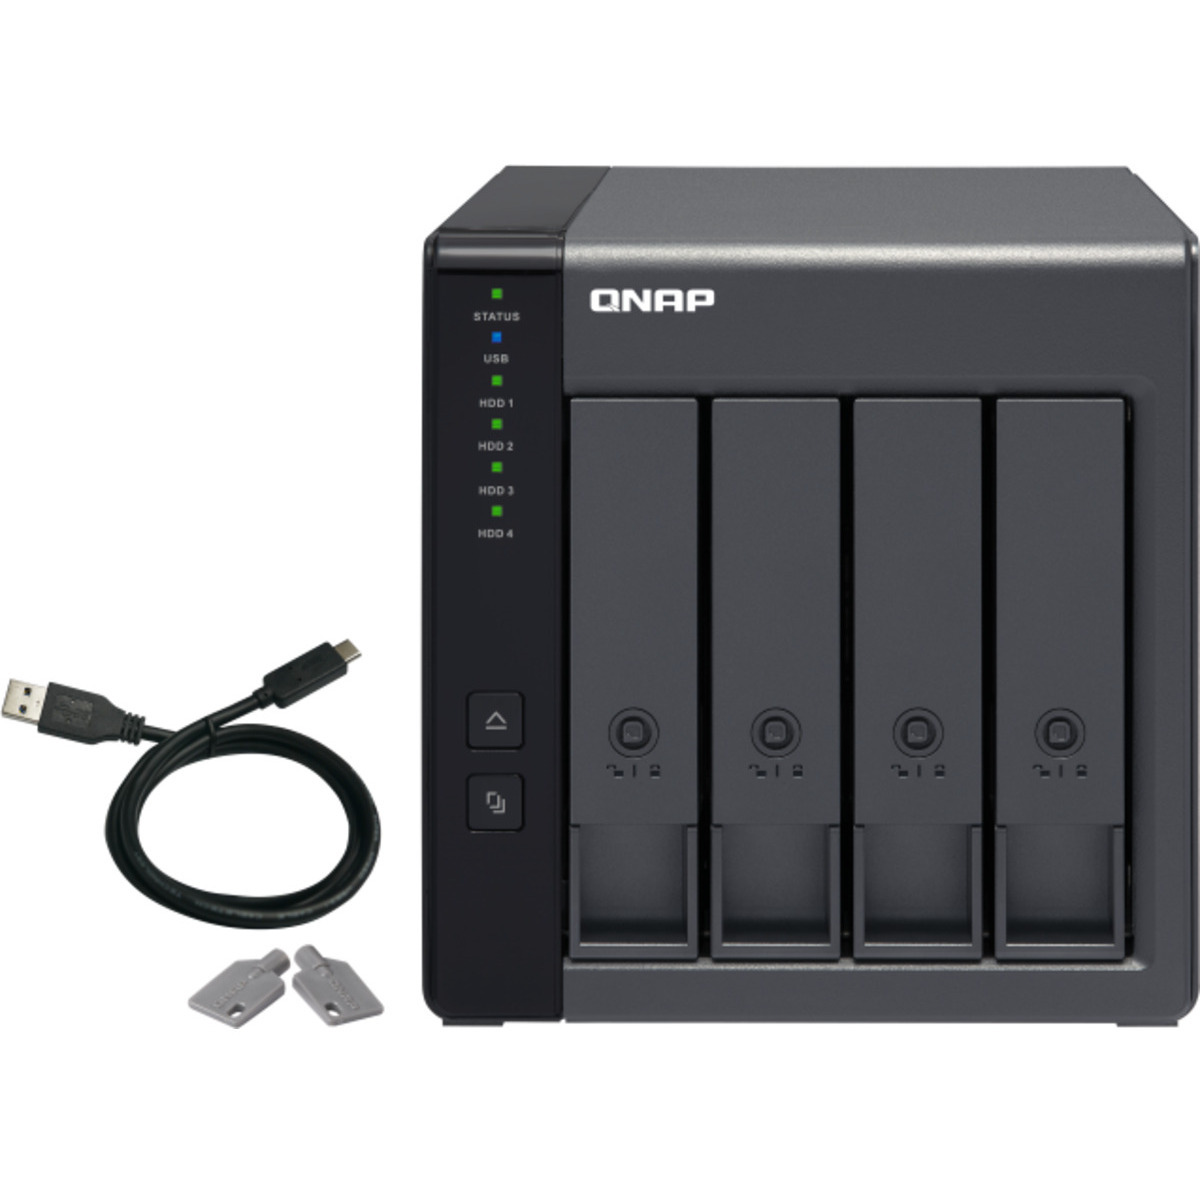 buy $746 QNAP TR-004 External Expansion Drive 16tb Desktop Expansion Enclosure 4x4000gb Western Digital Blue WD40EZRZ 3.5 5400rpm SATA 6Gb/s HDD CONSUMER Class Drives Installed - Burn-In Tested - nas headquarters buy network attached storage server device das new raid-5 free shipping usa christmas new year holiday sale TR-004 External Expansion Drive